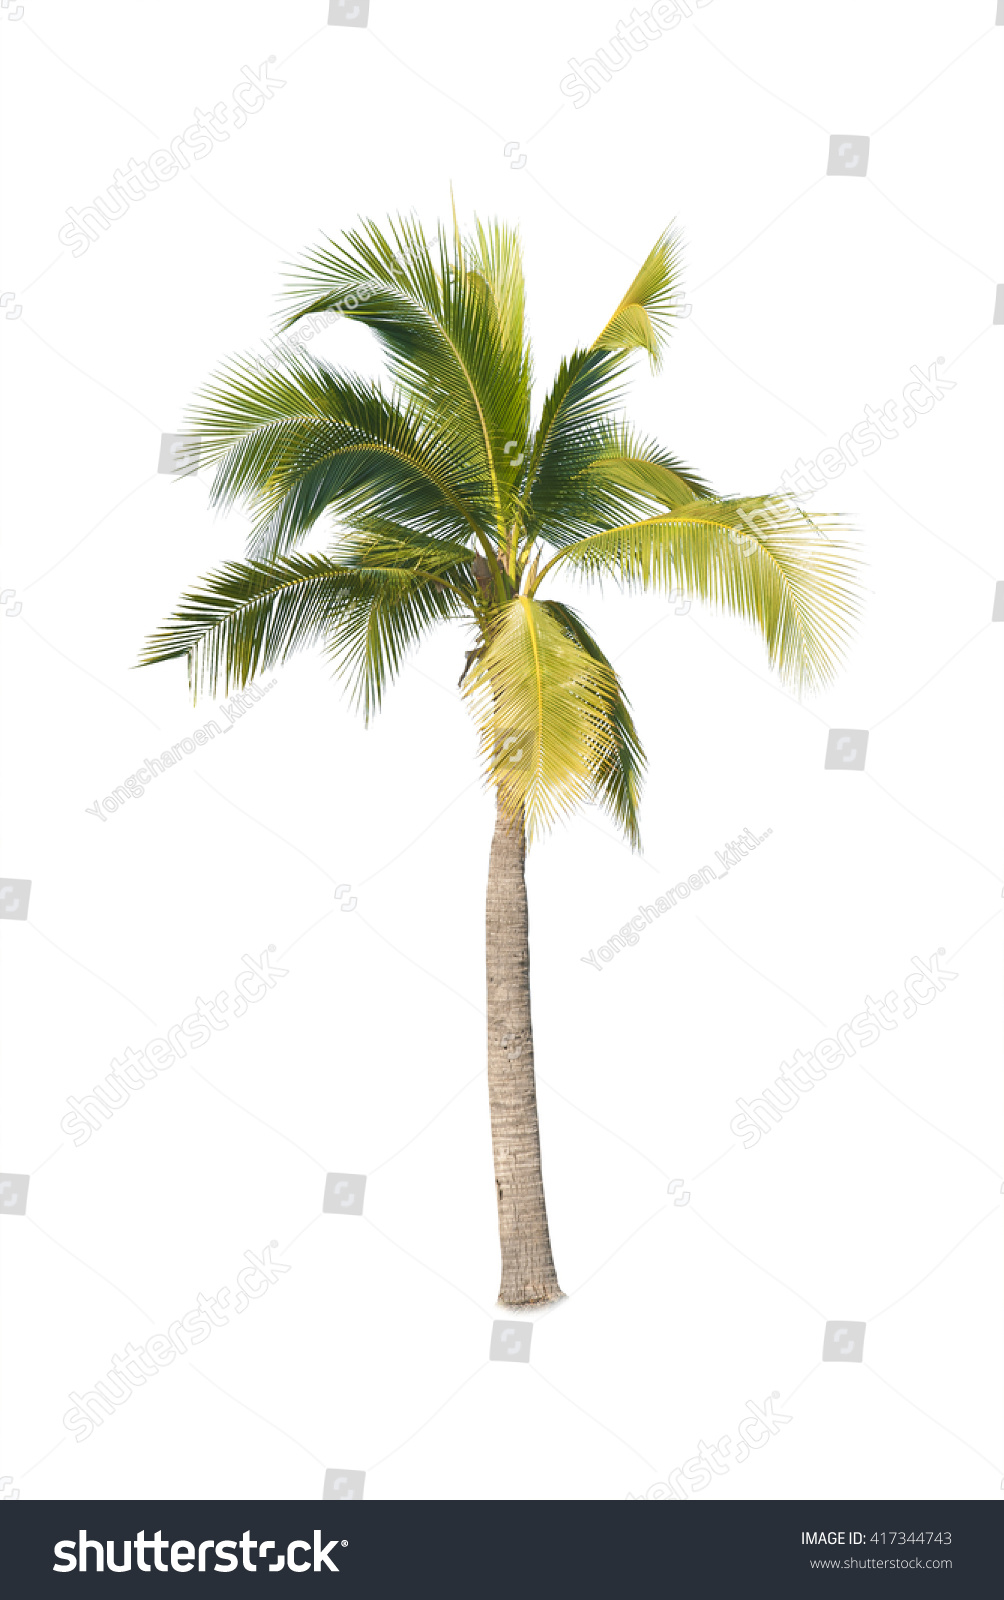 Coconut Tree On White Background Stock Photo 417344743 - Shutterstock